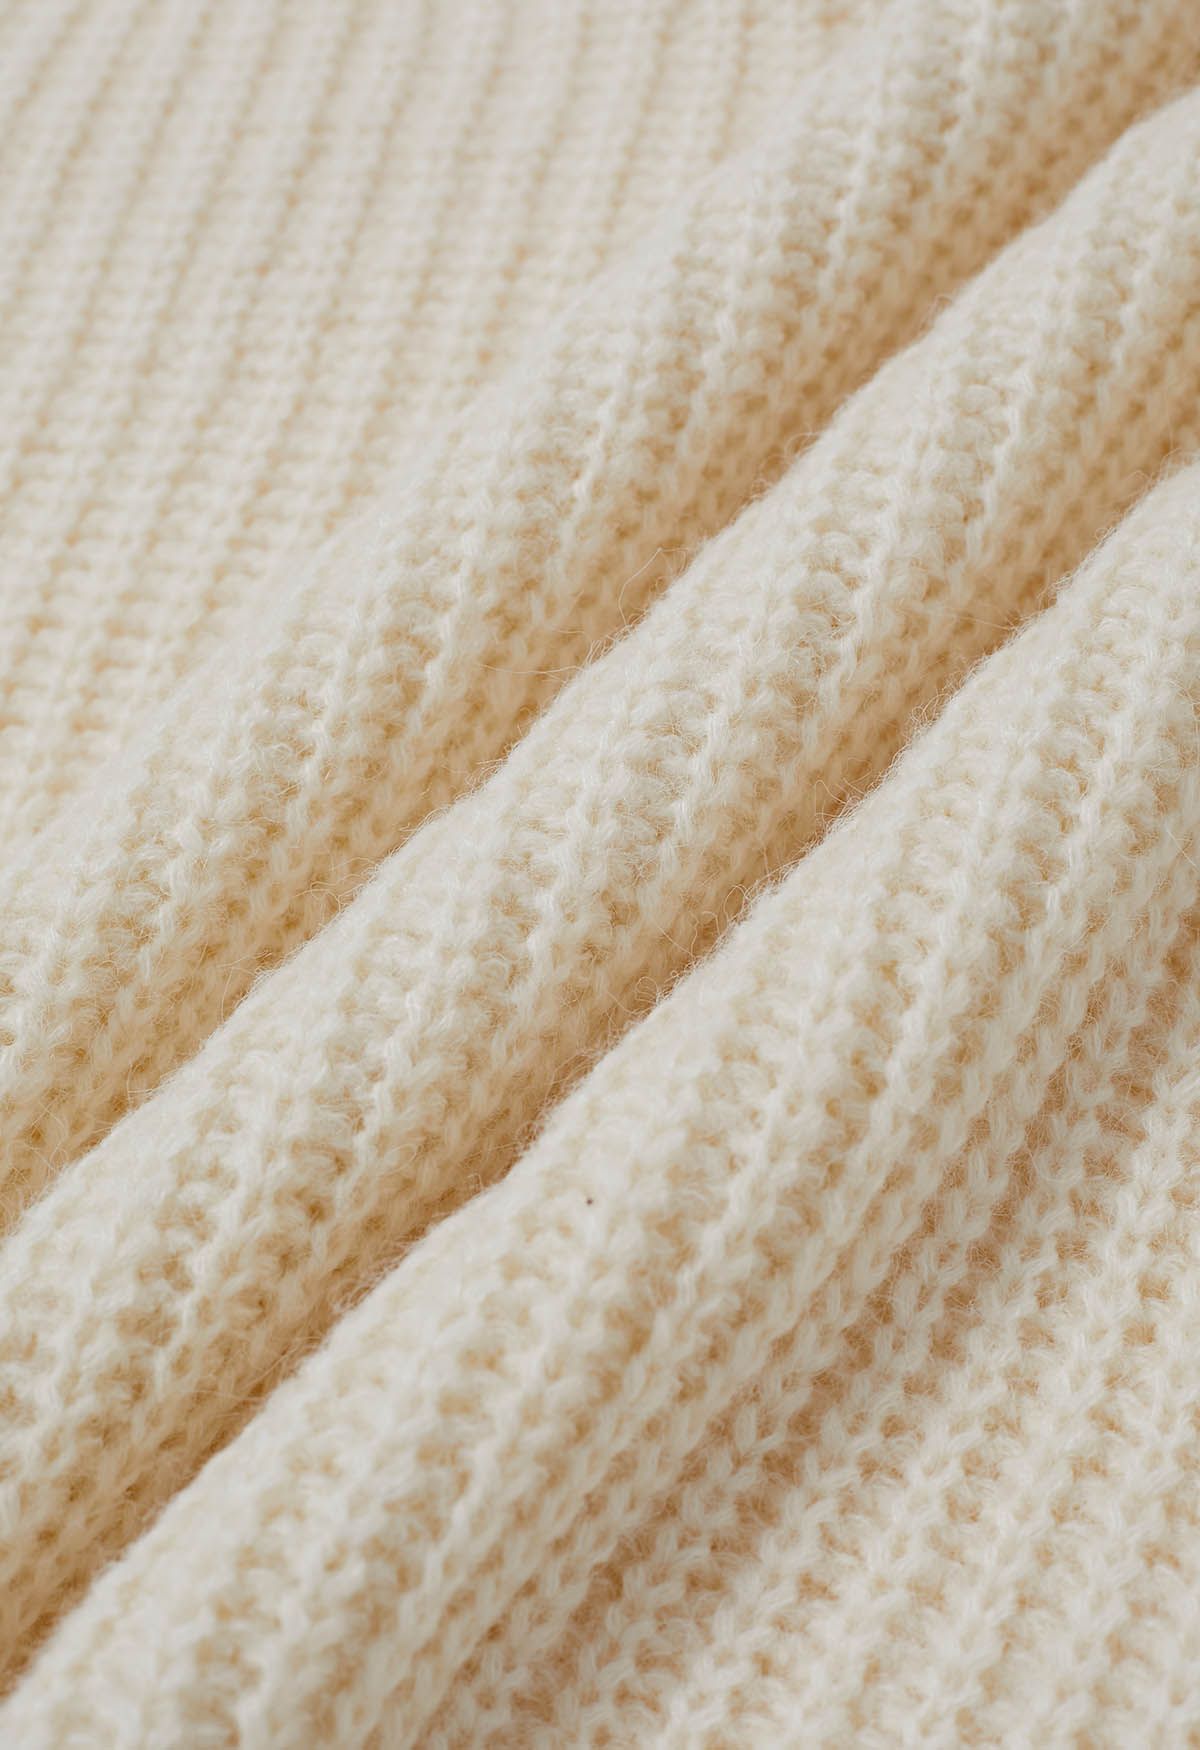 Solid Color Rib Knit Sweater in Ivory